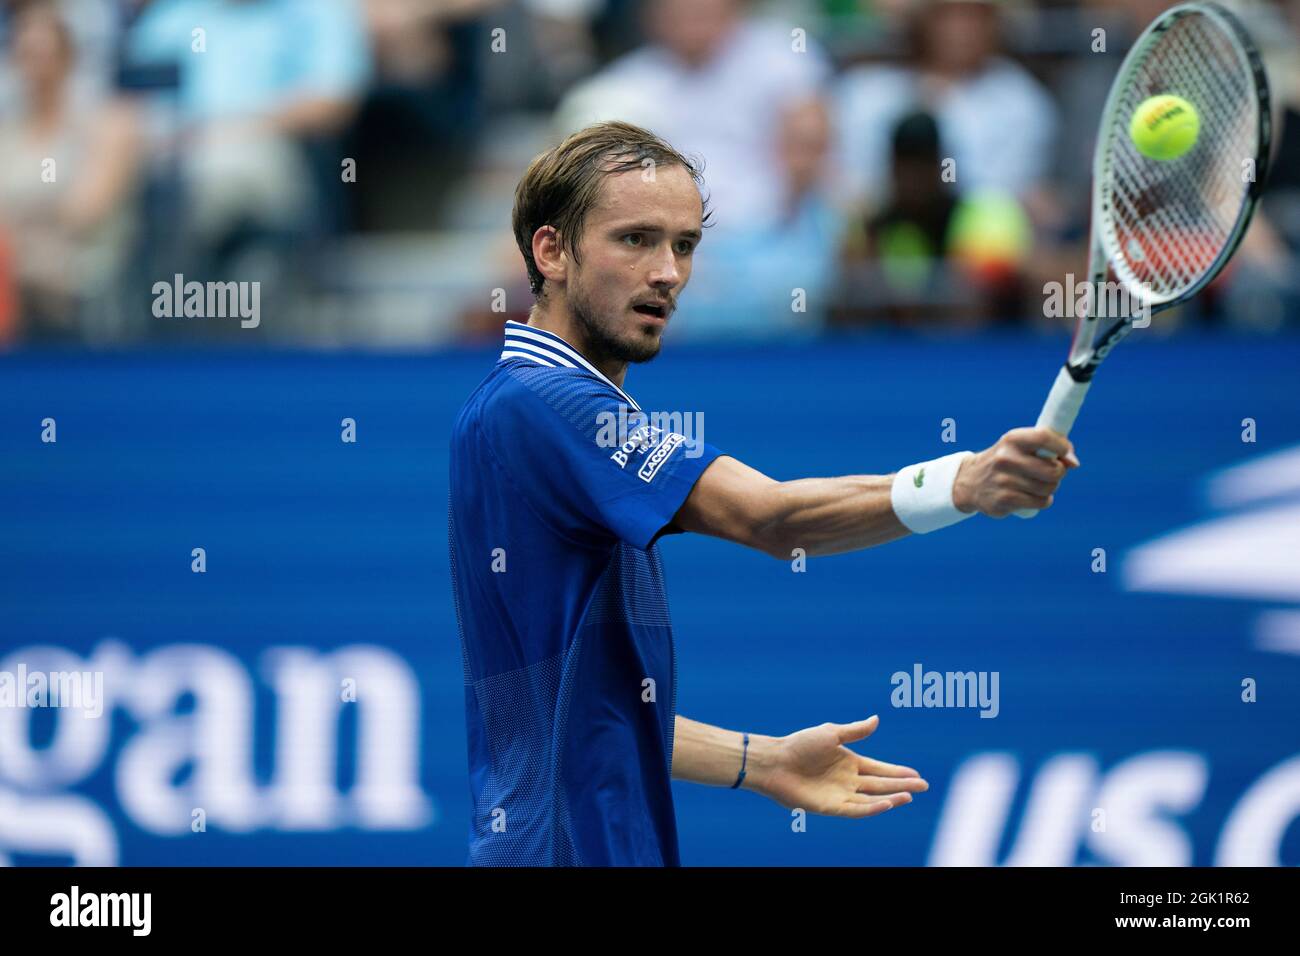 New York, USA, 12 September, 2021 Daniil Medvedev (RUS) in action during the men's final against Novak Djokovic (SRB) on day 14 at the 2021 US Open. Credit: Susan Mullane Credit: Susan Mullane/Alamy Live News Stock Photo